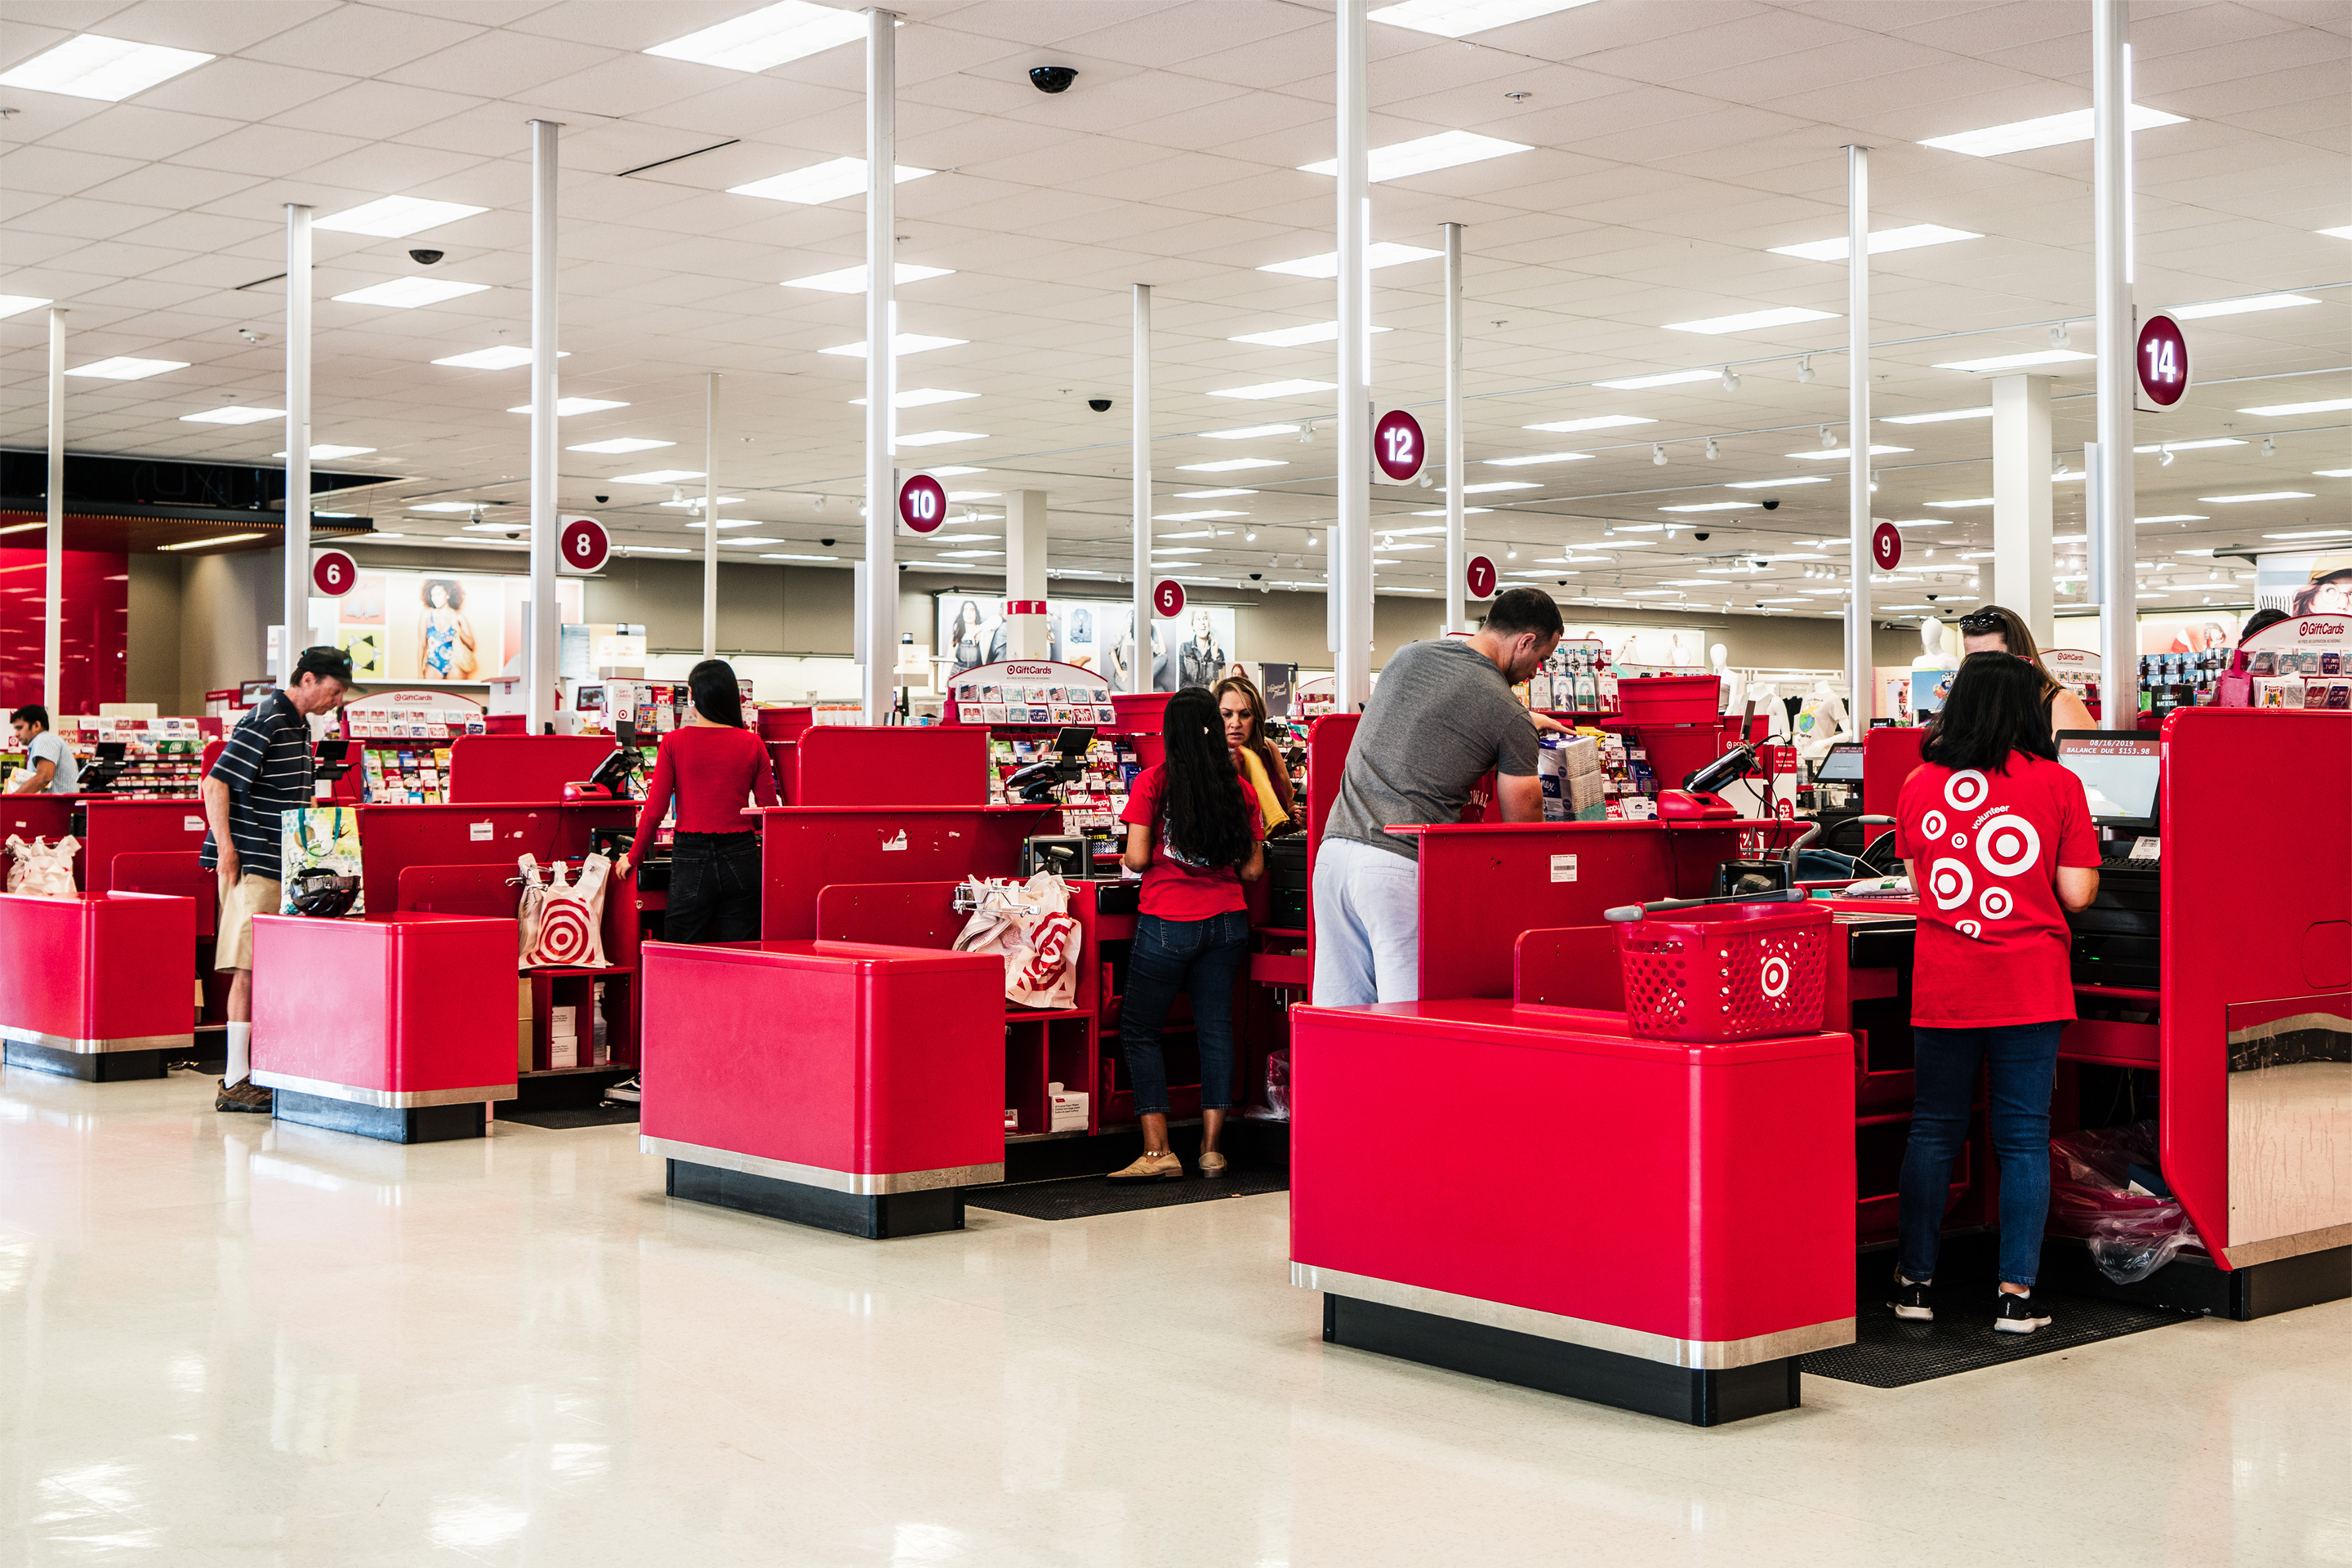 It's Amazon Prime Day. But Target Is Having a Massive 'Deal Days' Sale Too